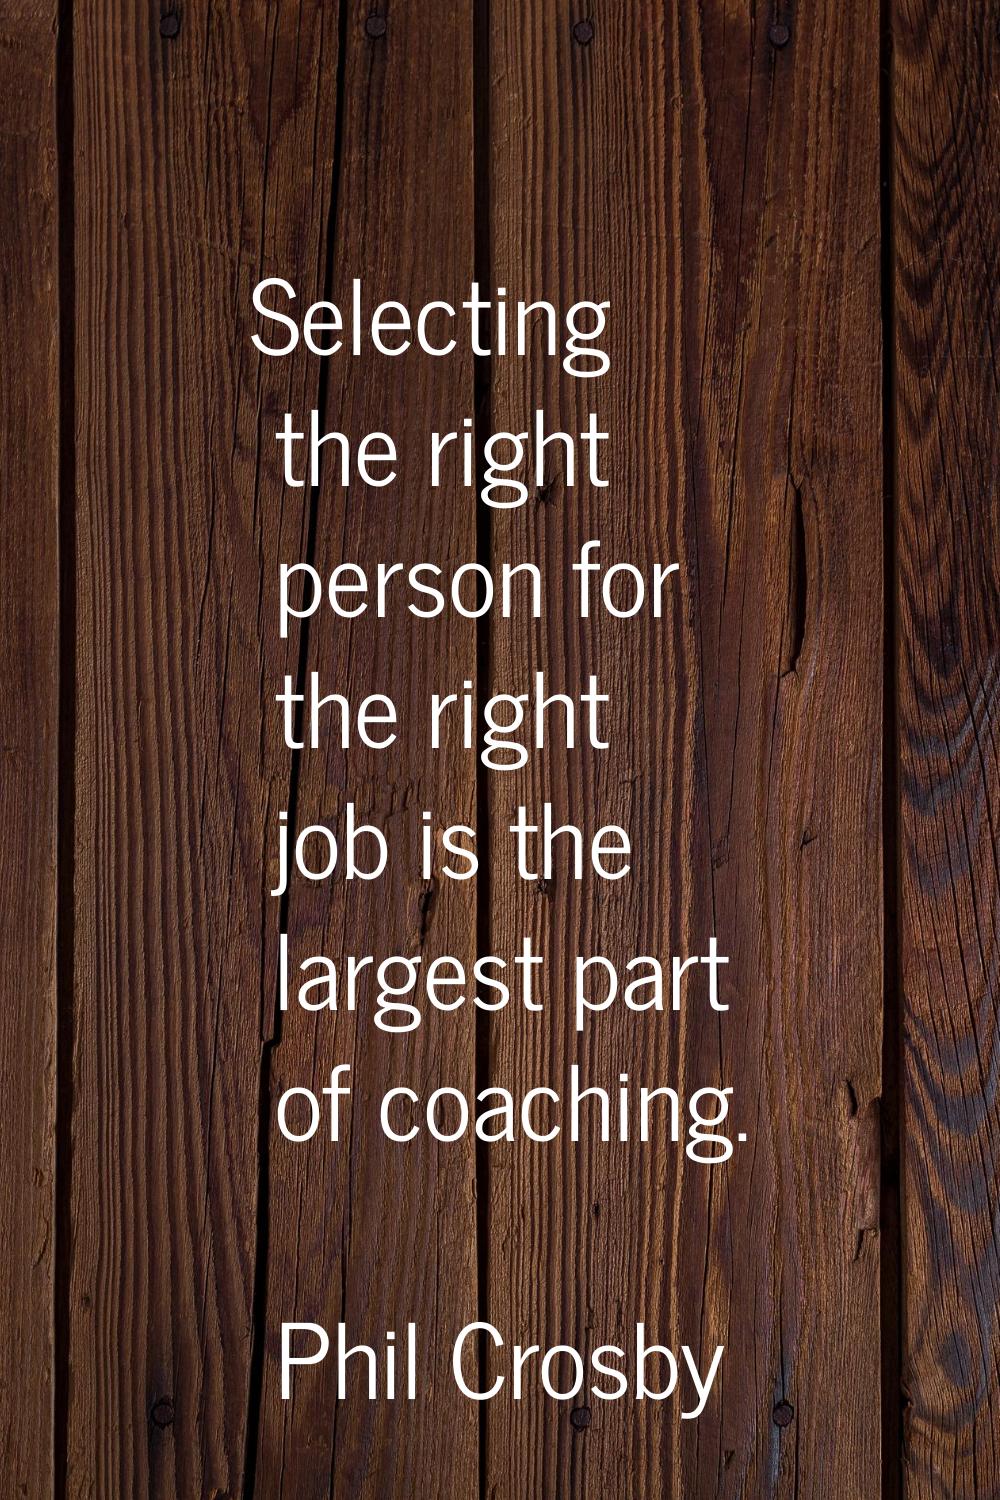 Selecting the right person for the right job is the largest part of coaching.